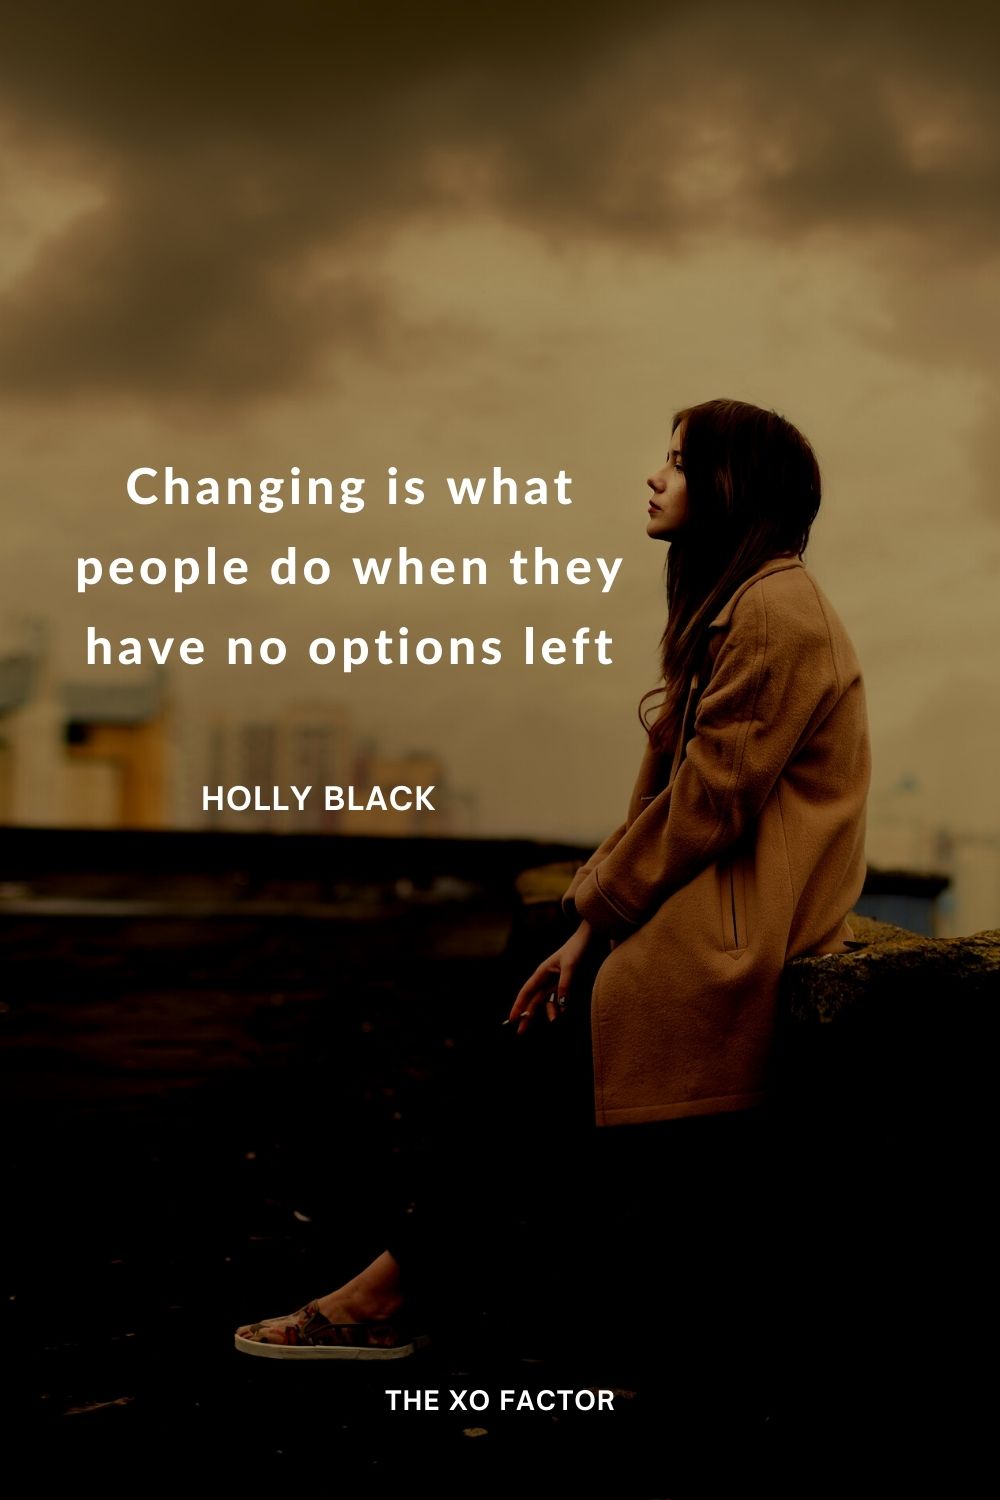 Changing is what people do when they have no options left.